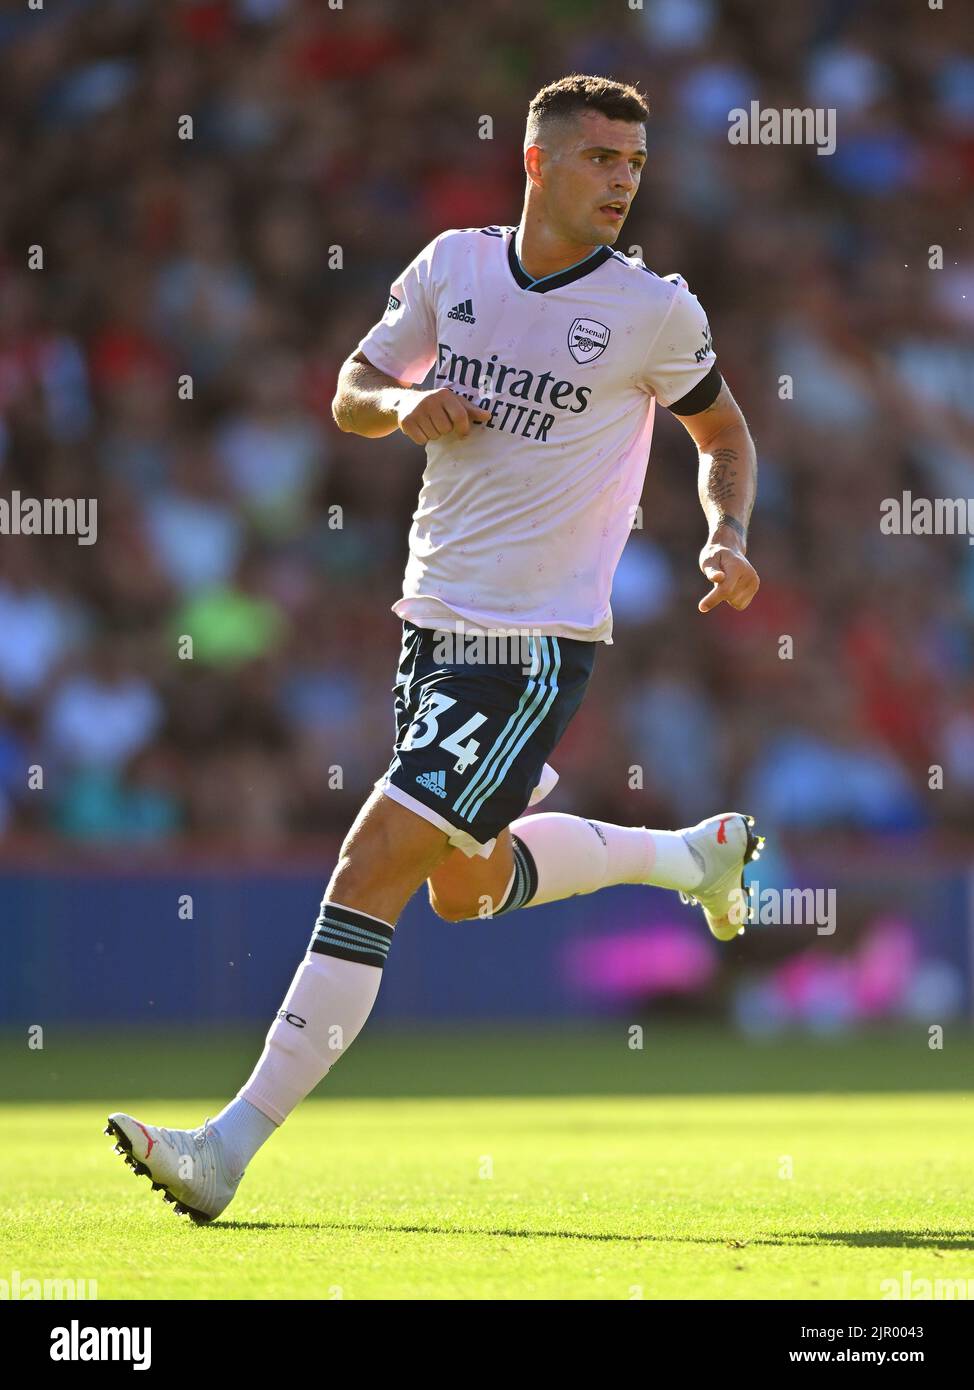 Bournemouth, UK. 20th Aug, 2022. 20 Aug 2022 - AFC Bournemouth v Arsenal - Premier League - Vitality Stadium Arsenal's Granit Xhaka during the Premier League match against Bournemouth. Picture Credit: Mark Pain/Alamy Live News Stock Photo